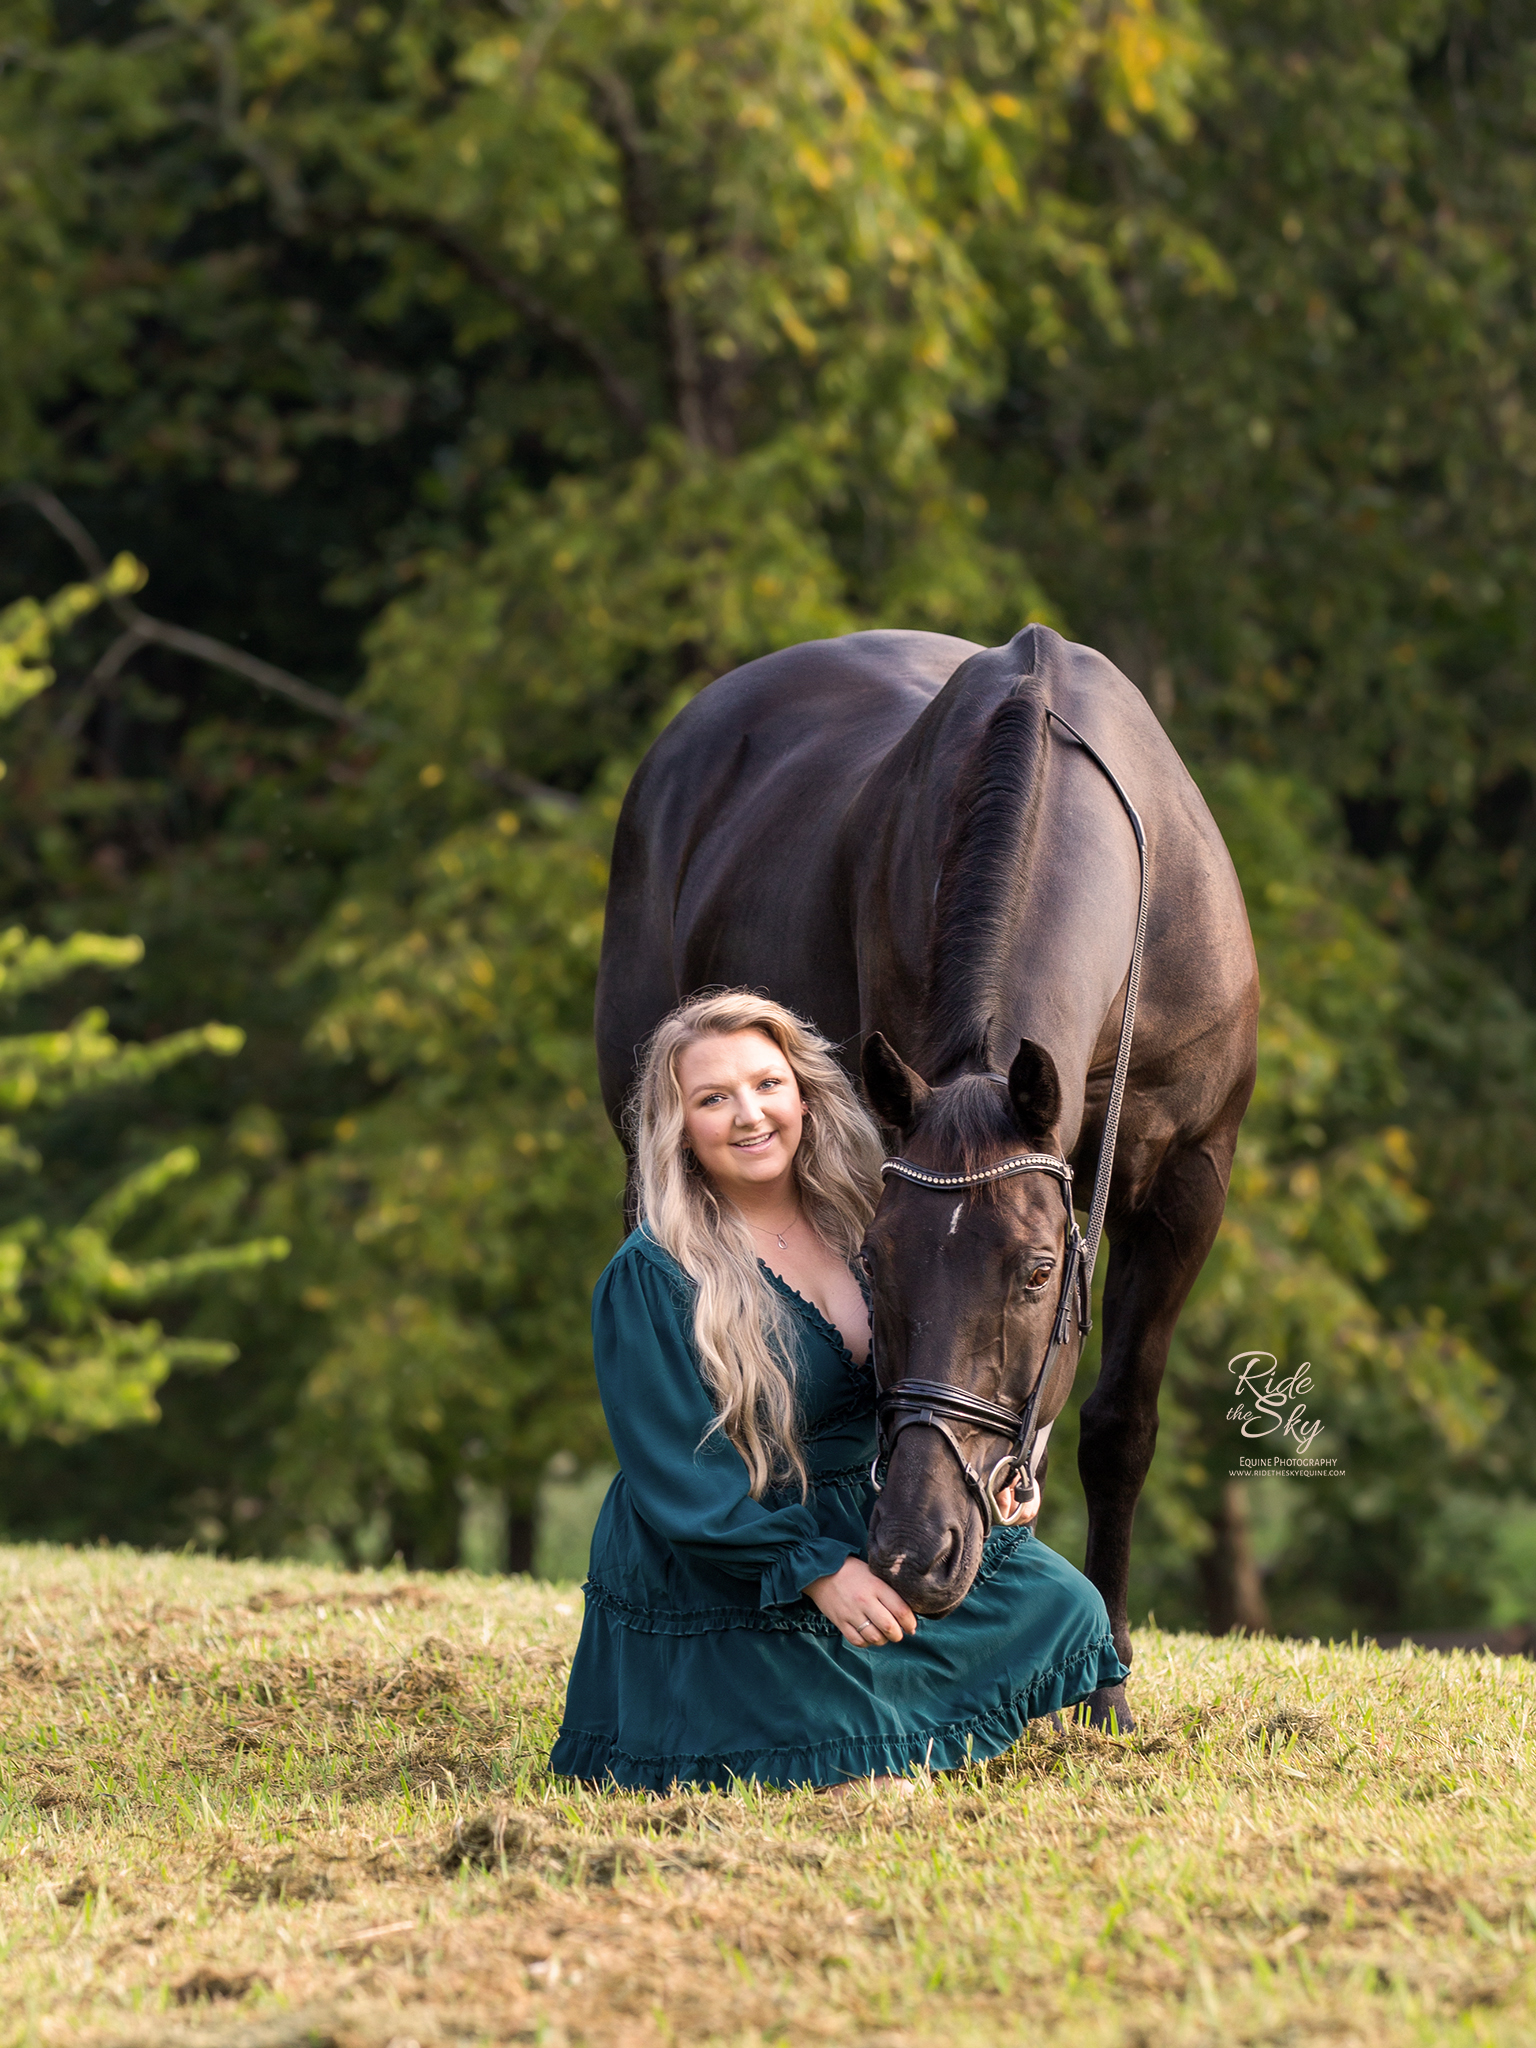 High School Senior photographed with her quarter horse at Break 'n run farms in Ooltewah